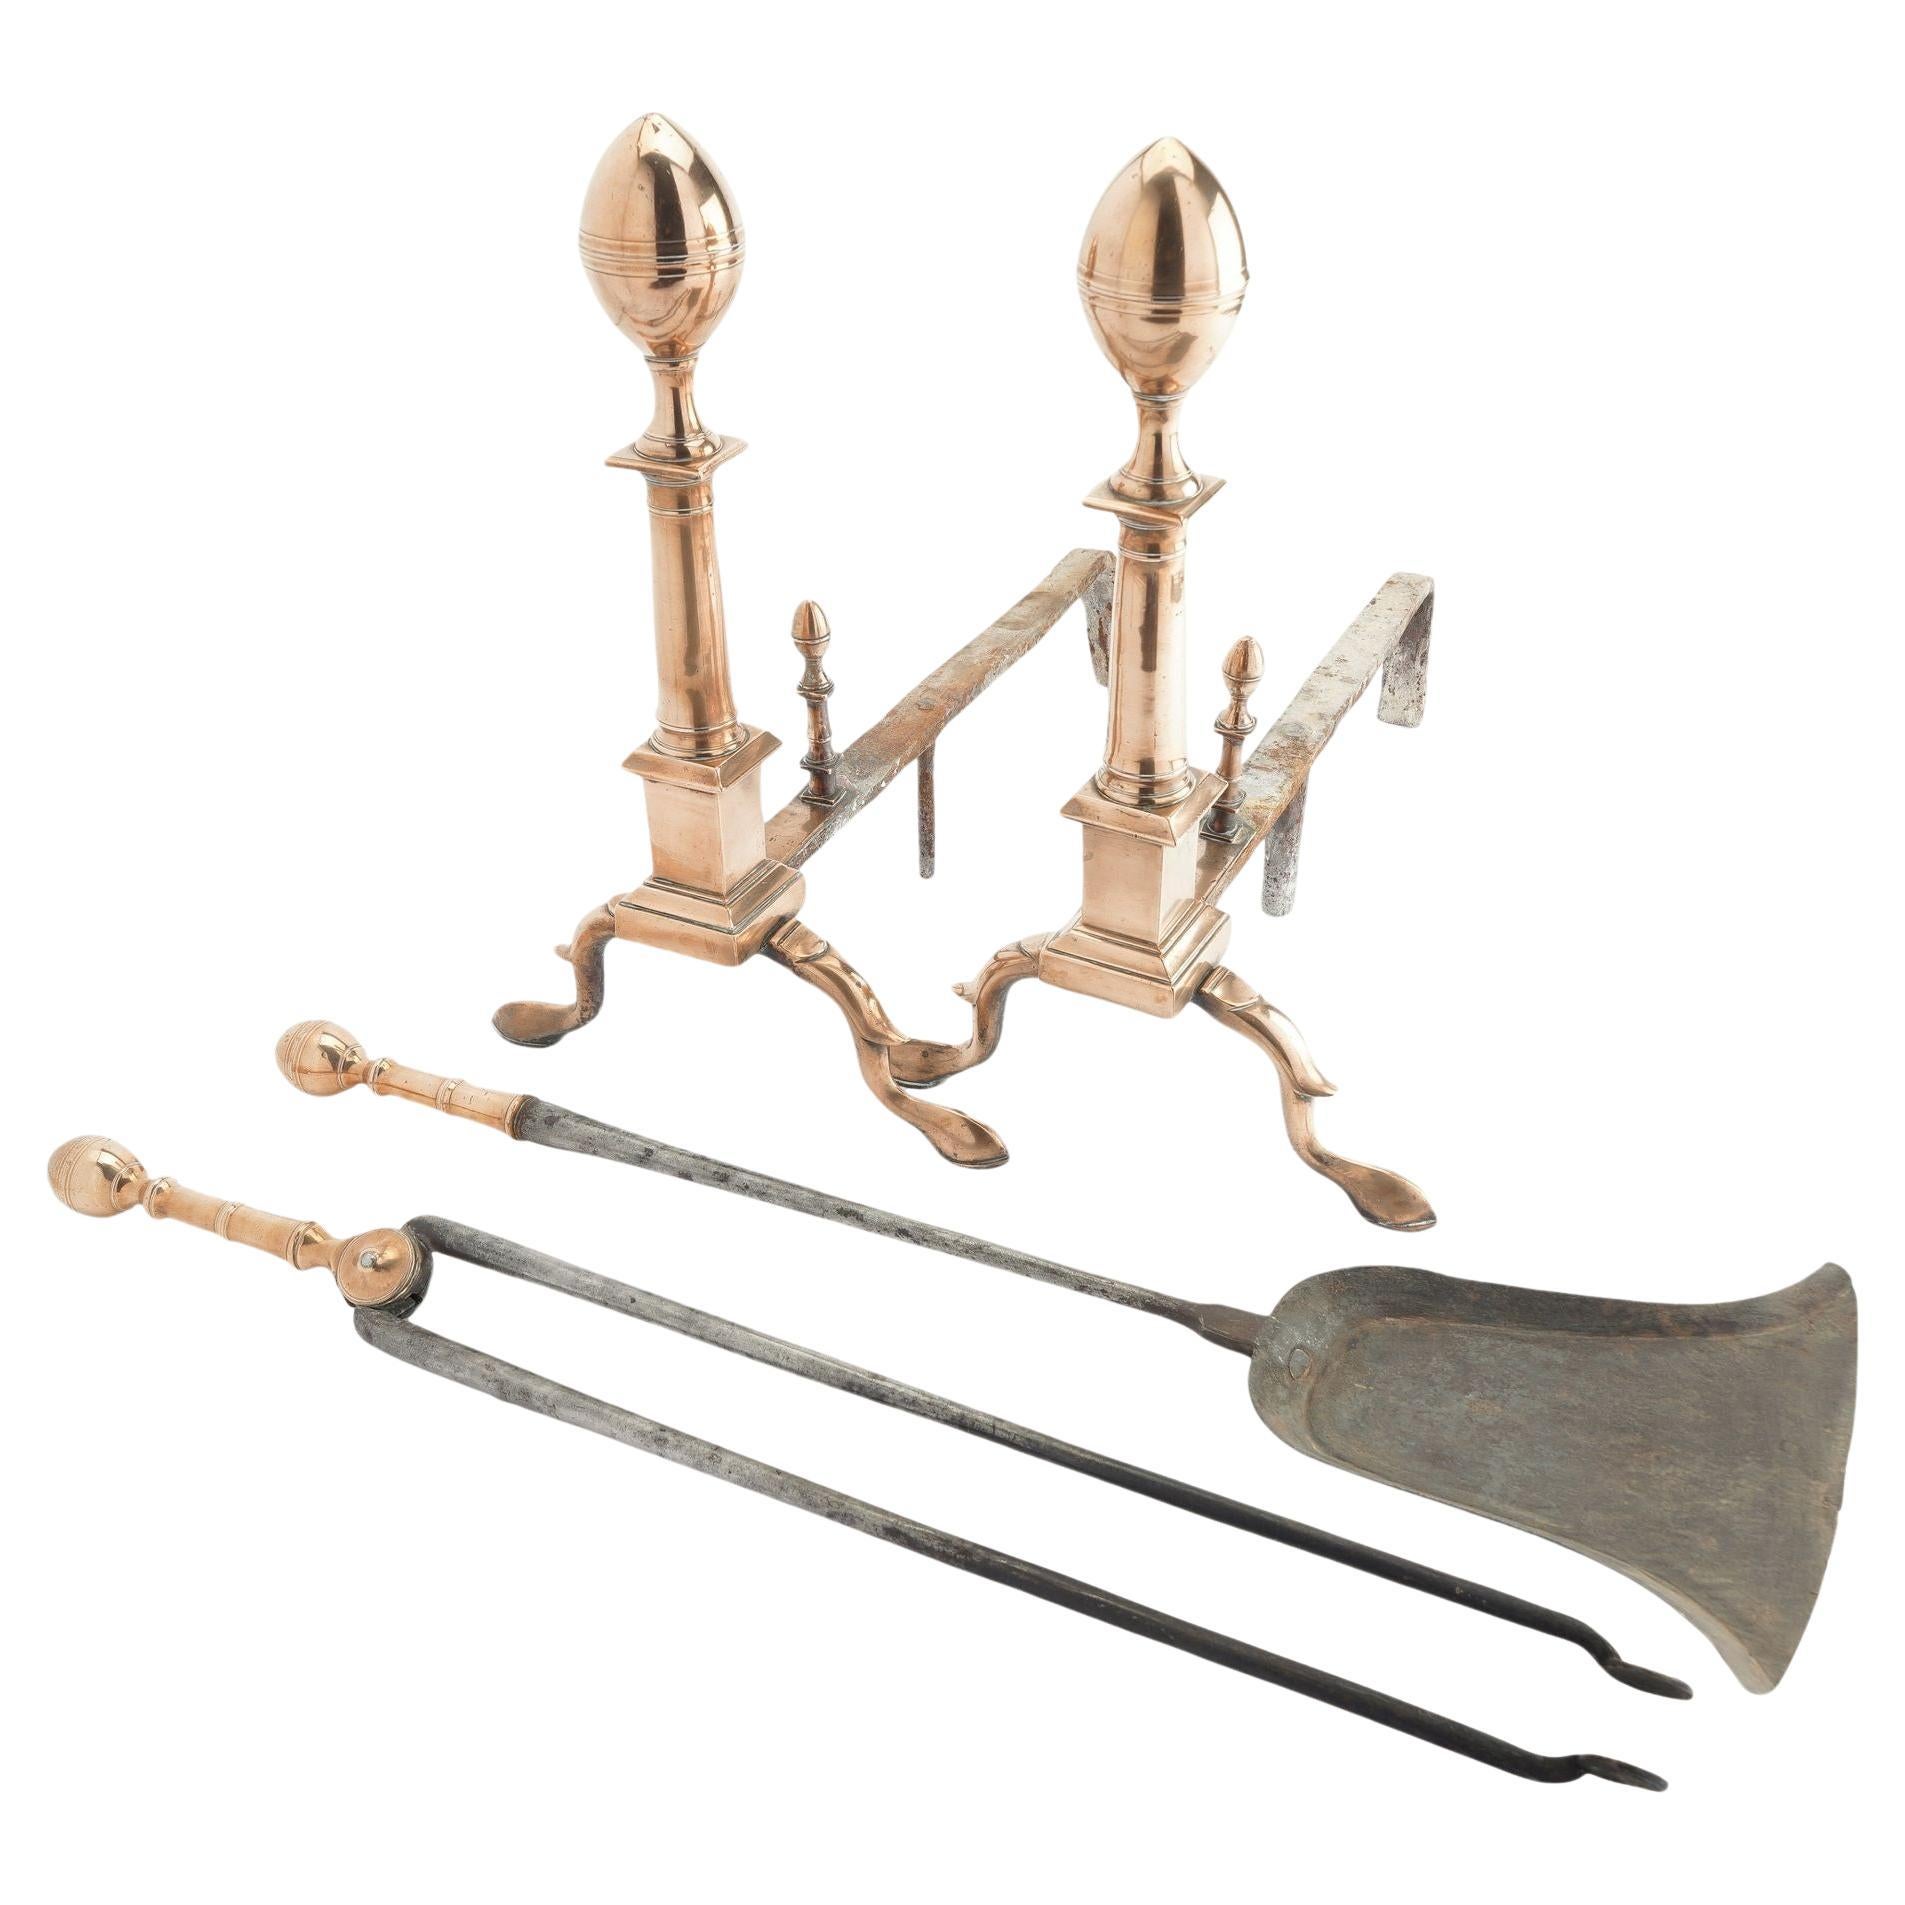 Boston bell metal lemon top andirons with matching fire tools, c. 1790